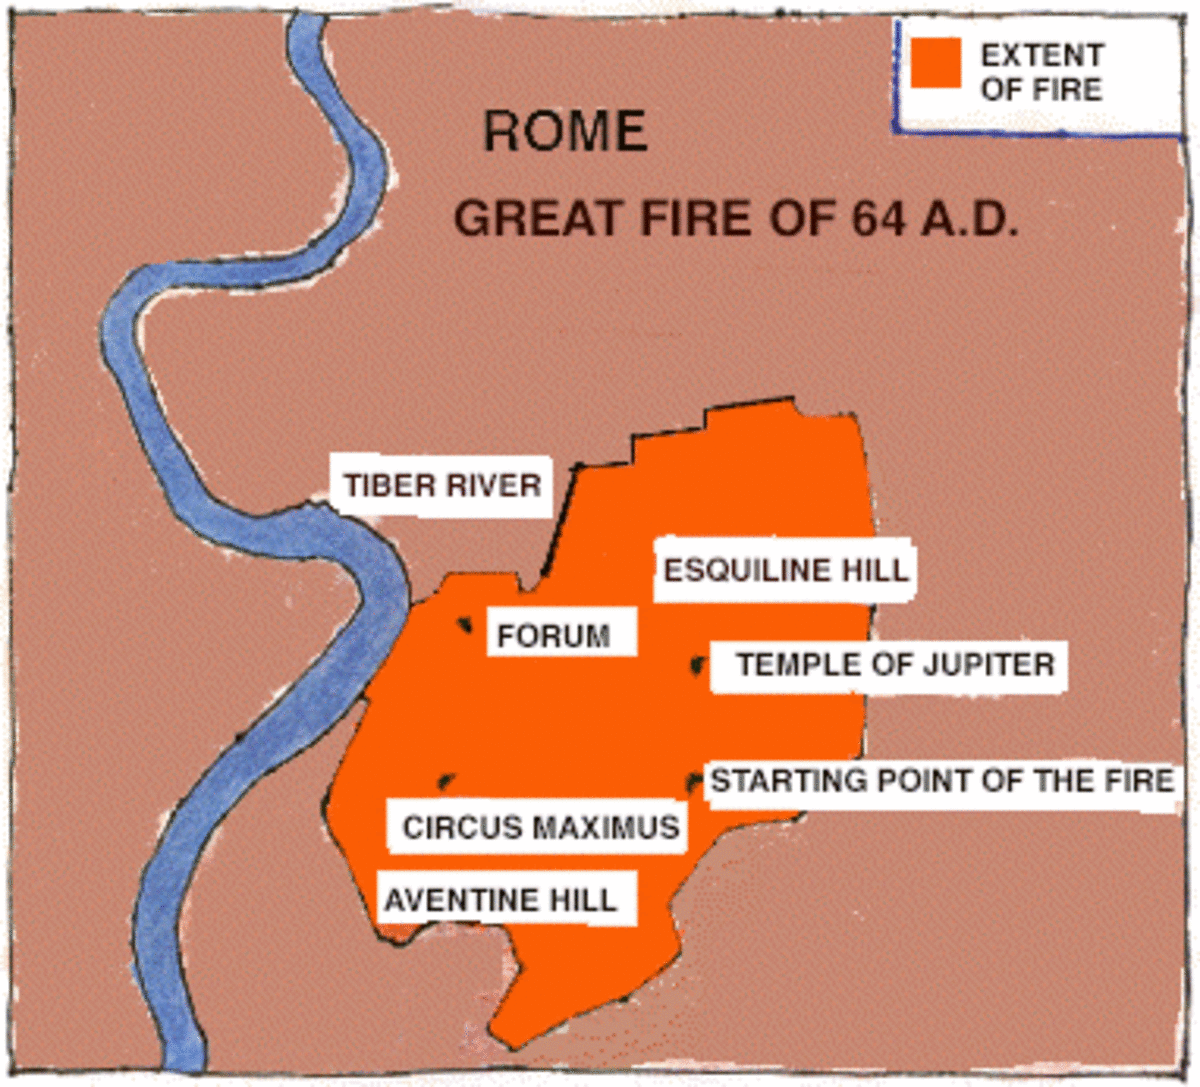 The extent of the Great Fire left much of urban Rome devastated, which called for Nero to rebuild Rome from a "city held together by matches" to a more sustainable city. 